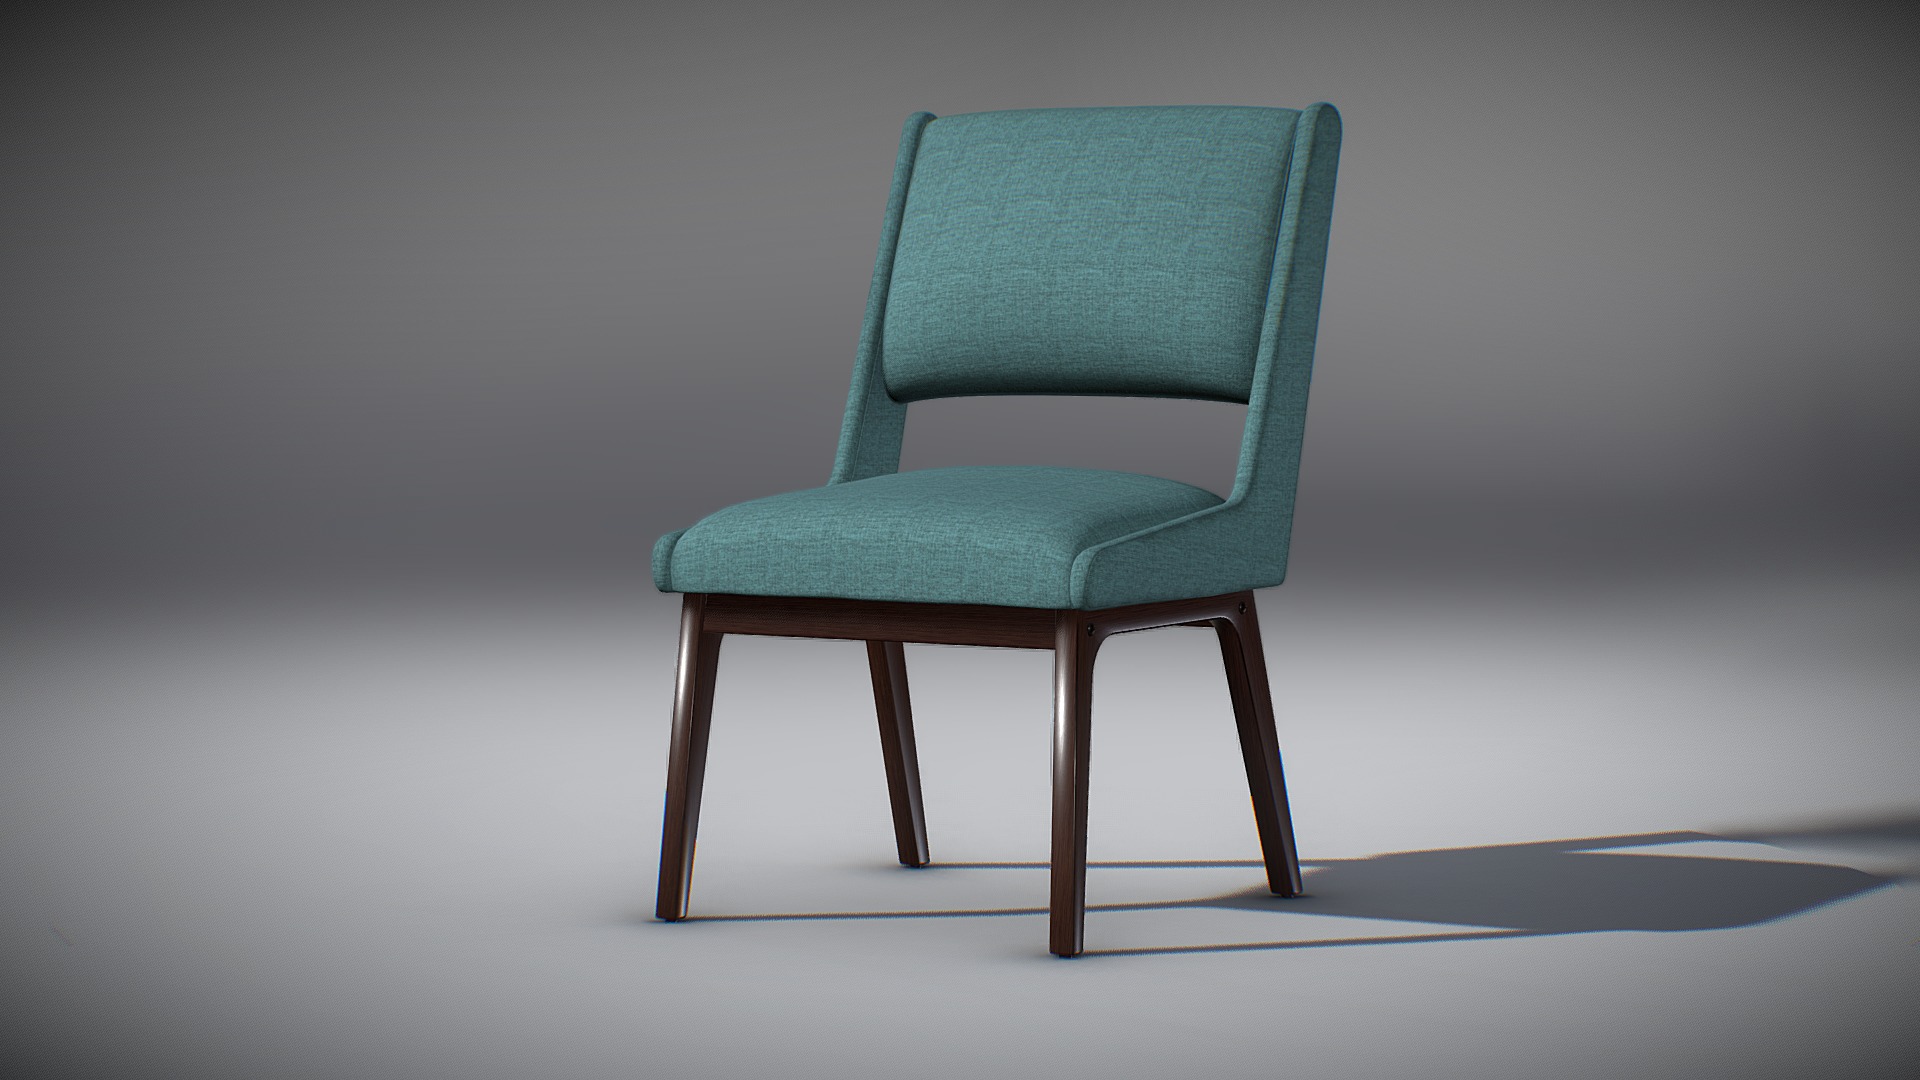 3D model DinningChair - This is a 3D model of the DinningChair. The 3D model is about a green chair with a blue cushion.